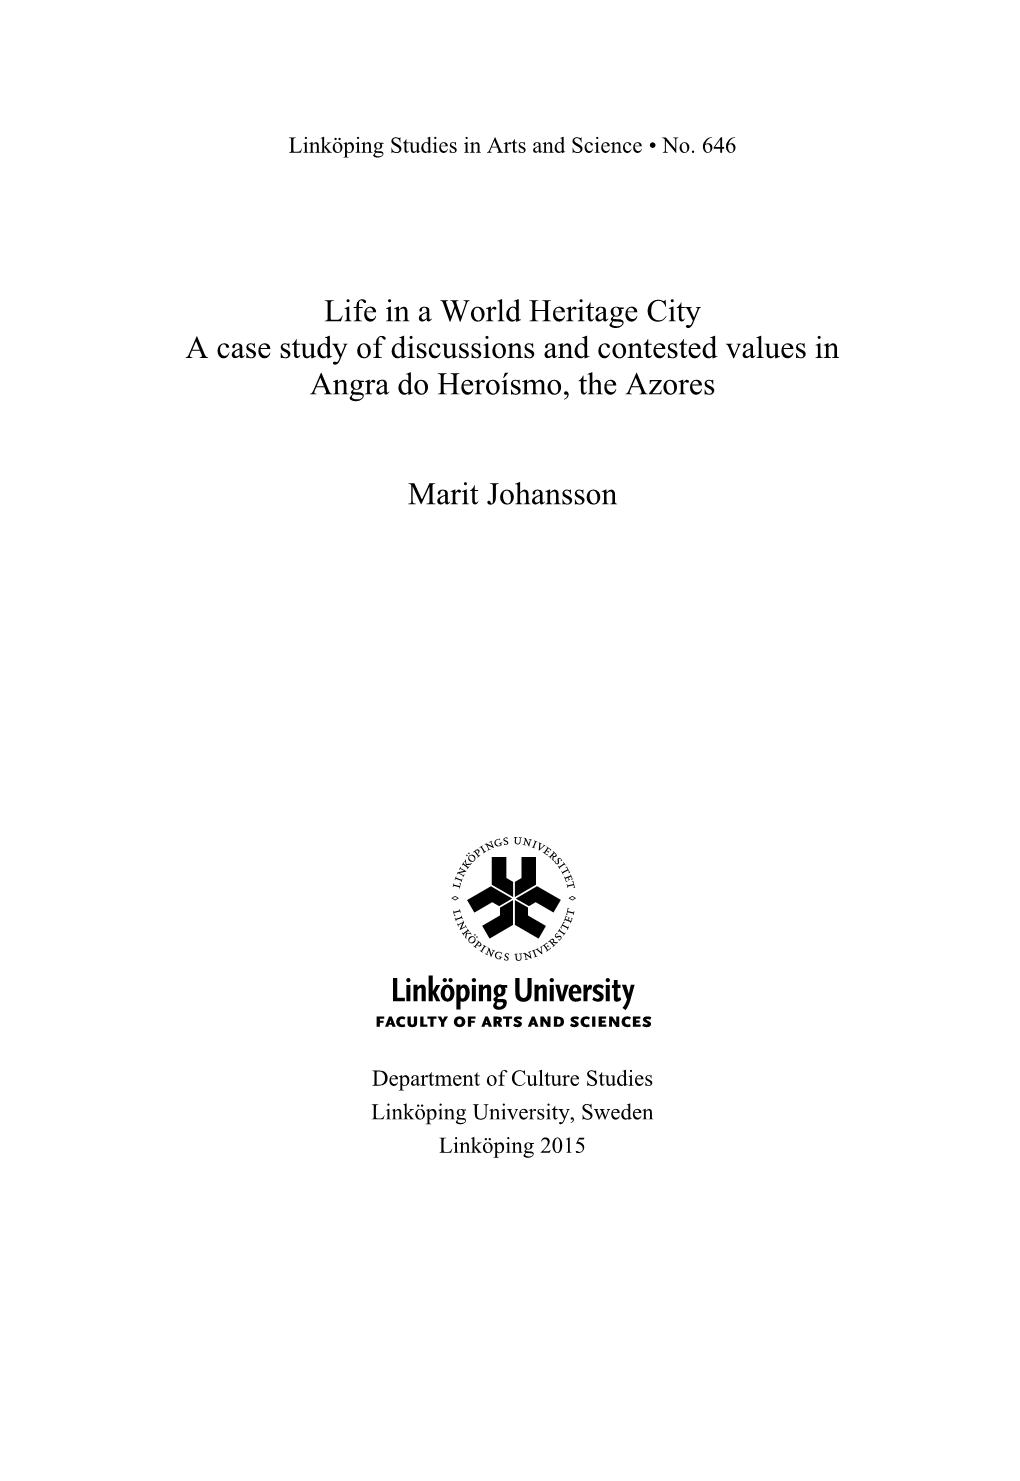 Life in a World Heritage City a Case Study of Discussions and Contested Values in Angra Do Heroísmo, the Azores